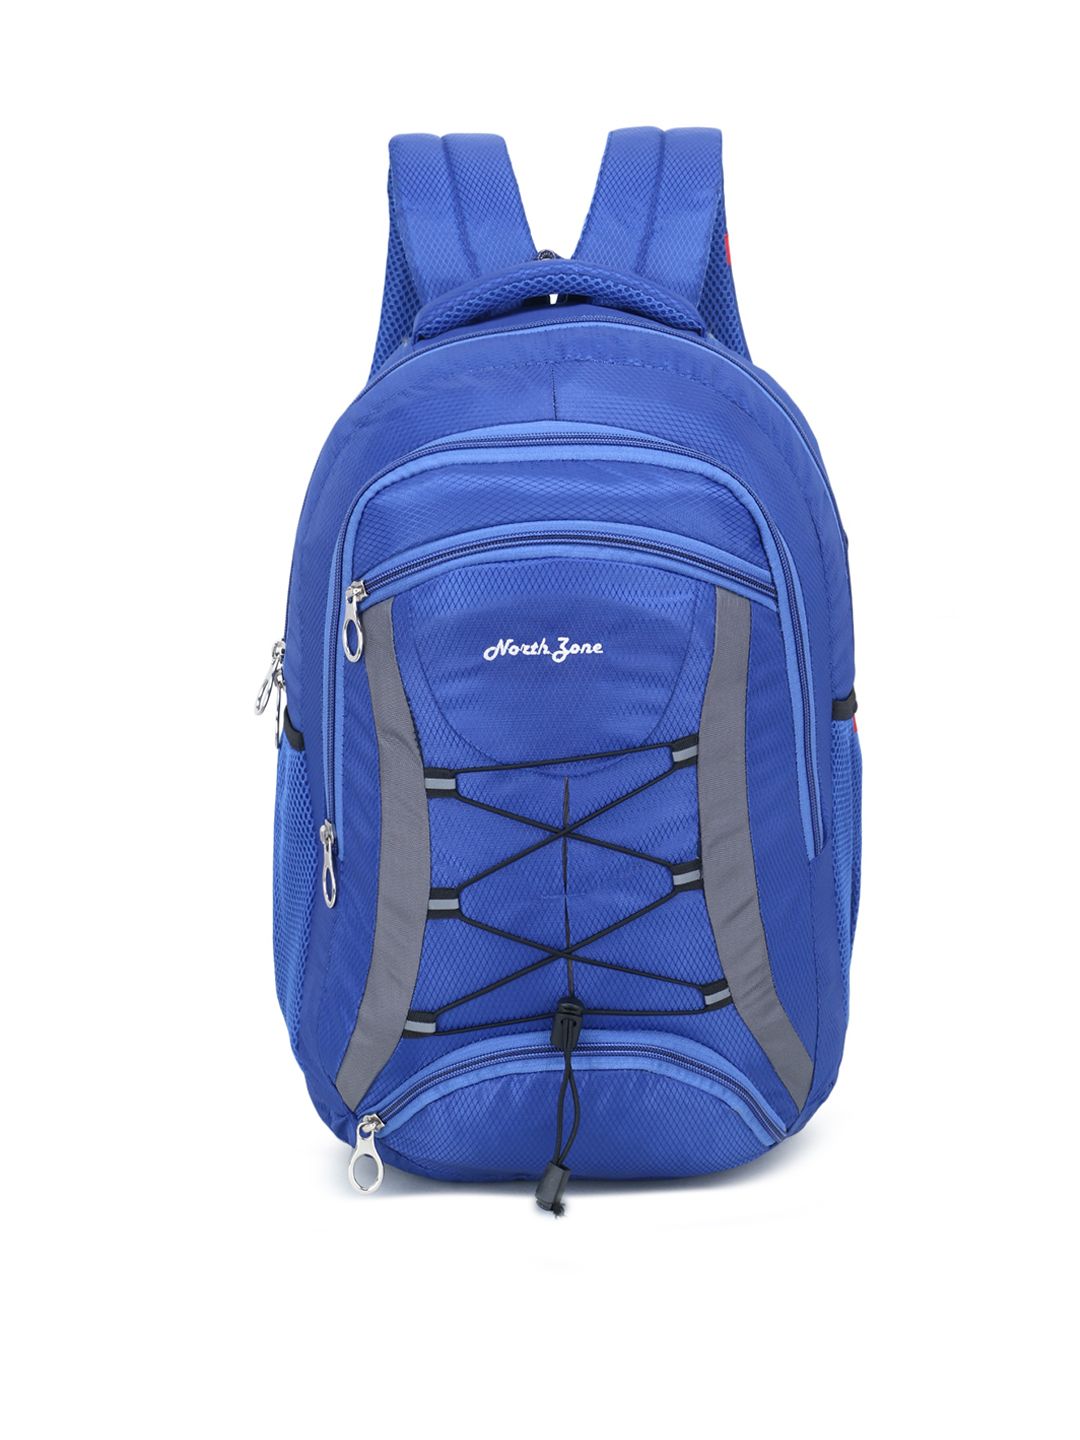 Northzone Adults Unisex Royal Blue 18 Inch Laptop Water Resistance Backpack Price in India